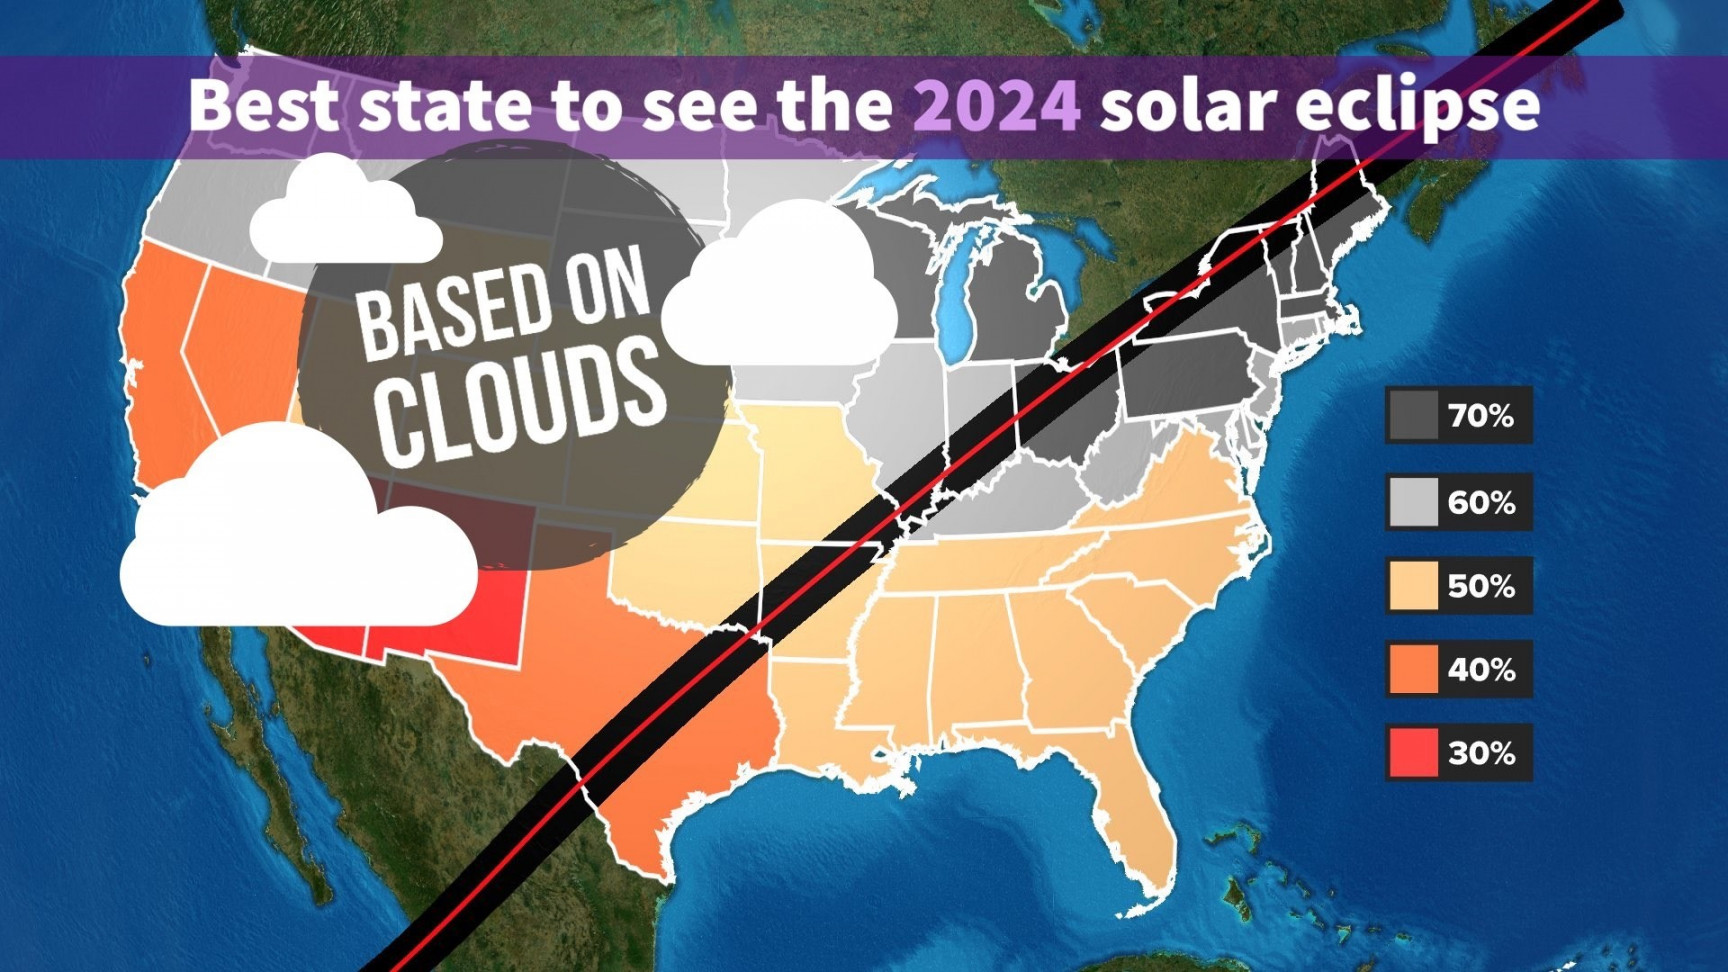 Which is the best state to see the  solar eclipse based on clouds?